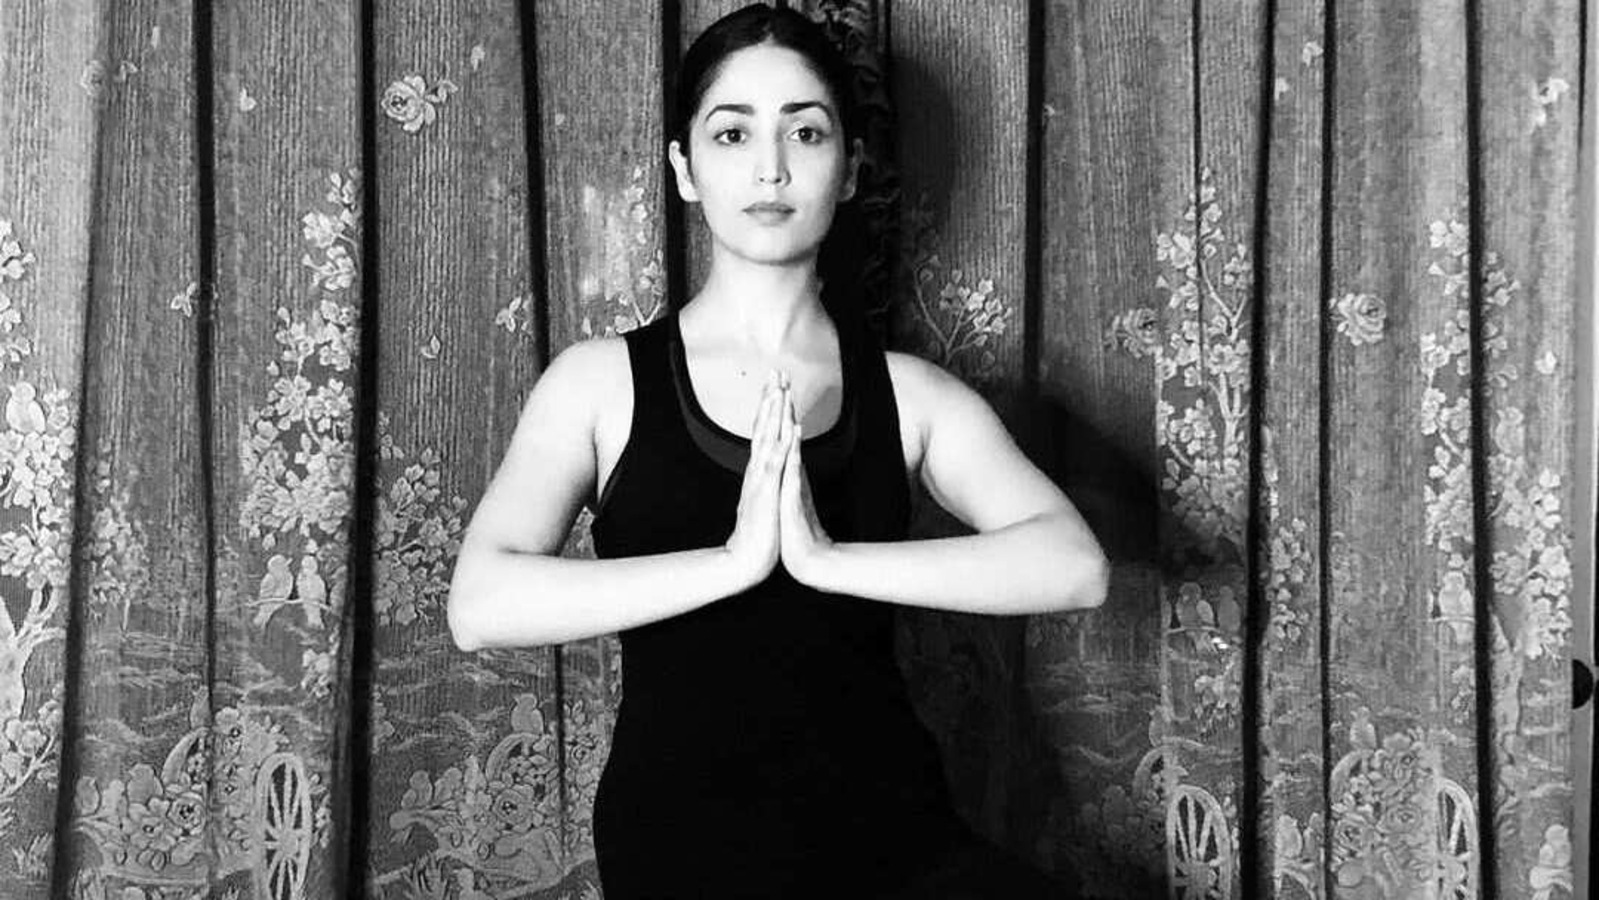 Yami Gautam Opens Up About A Road Accident That Impacted Her Ias Dream Car Sped Away Without